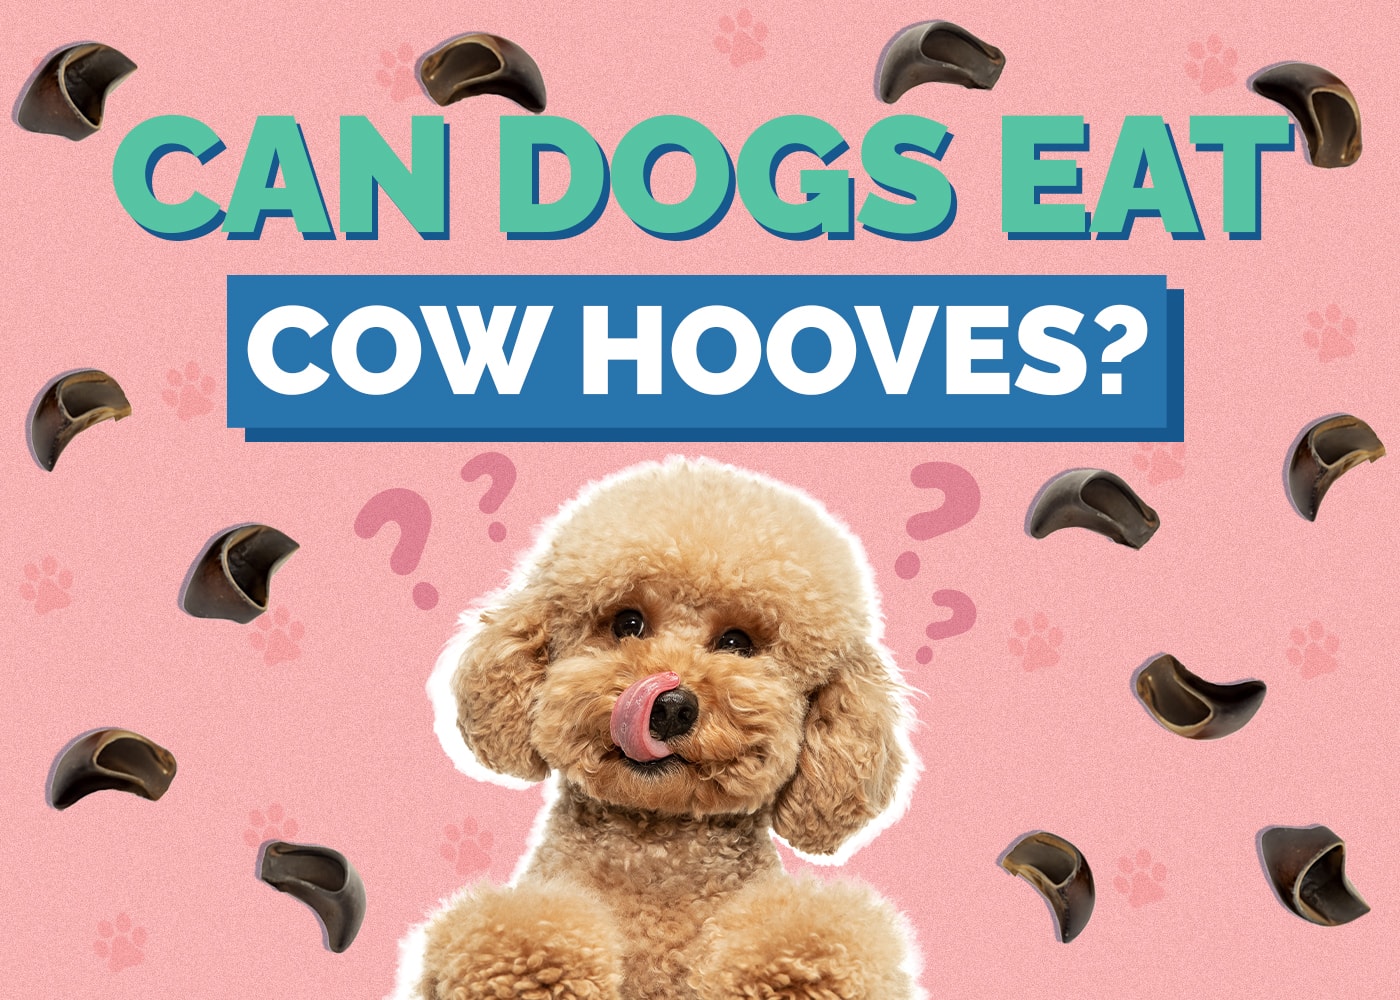 Can Dogs Eat Cow Hooves